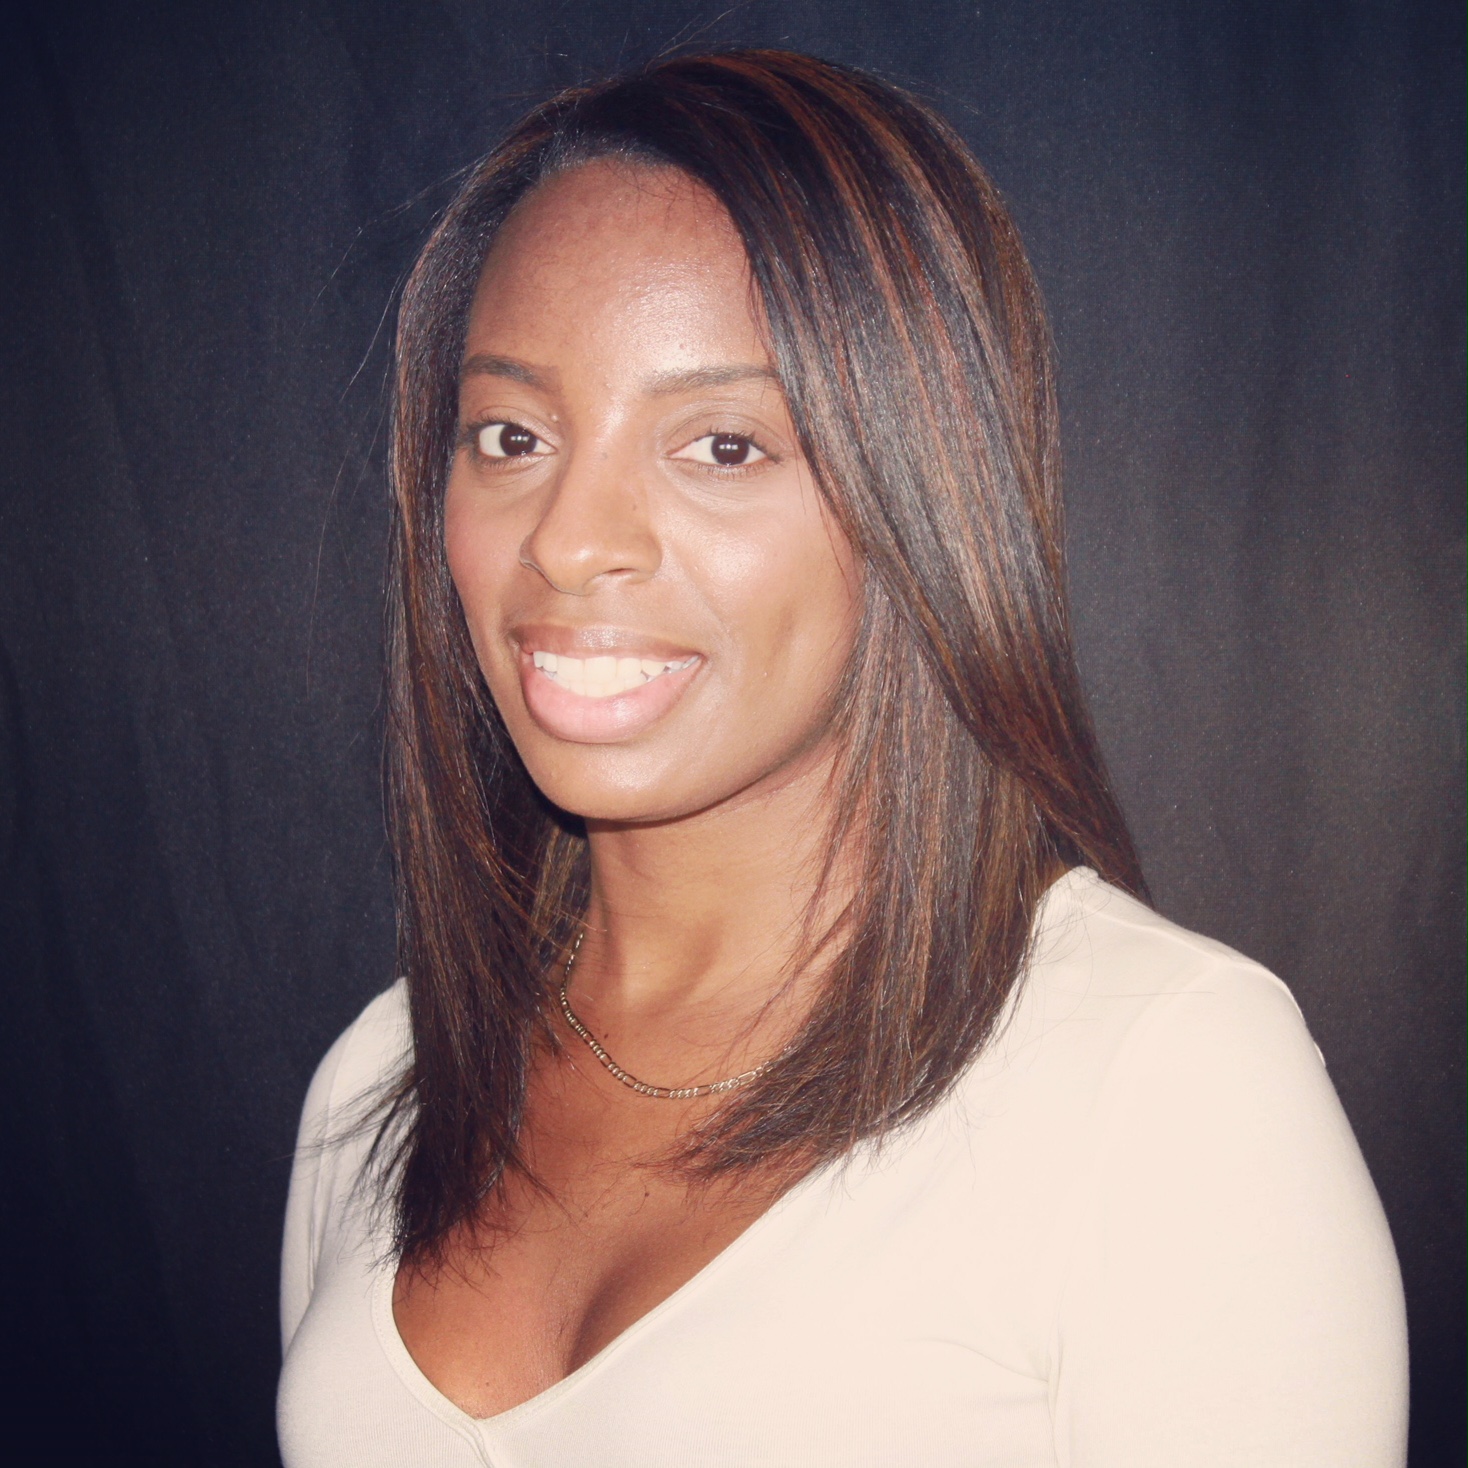 Erica Beckford - CEO and founder of Holt Virtual Assistance